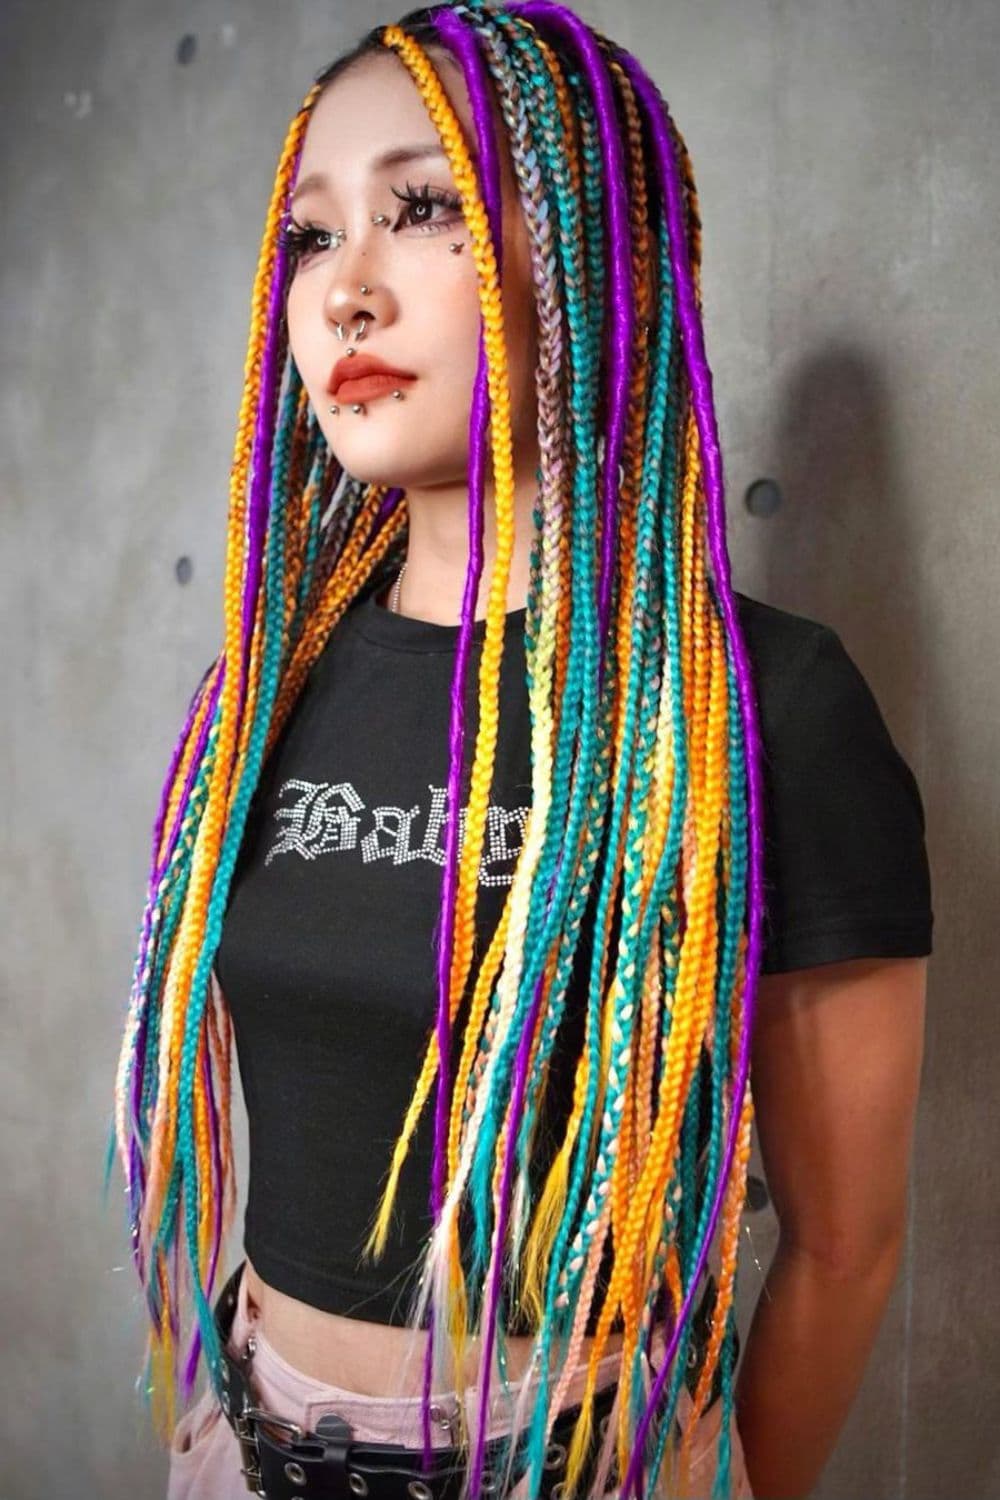 A woman with long multicolored braids.